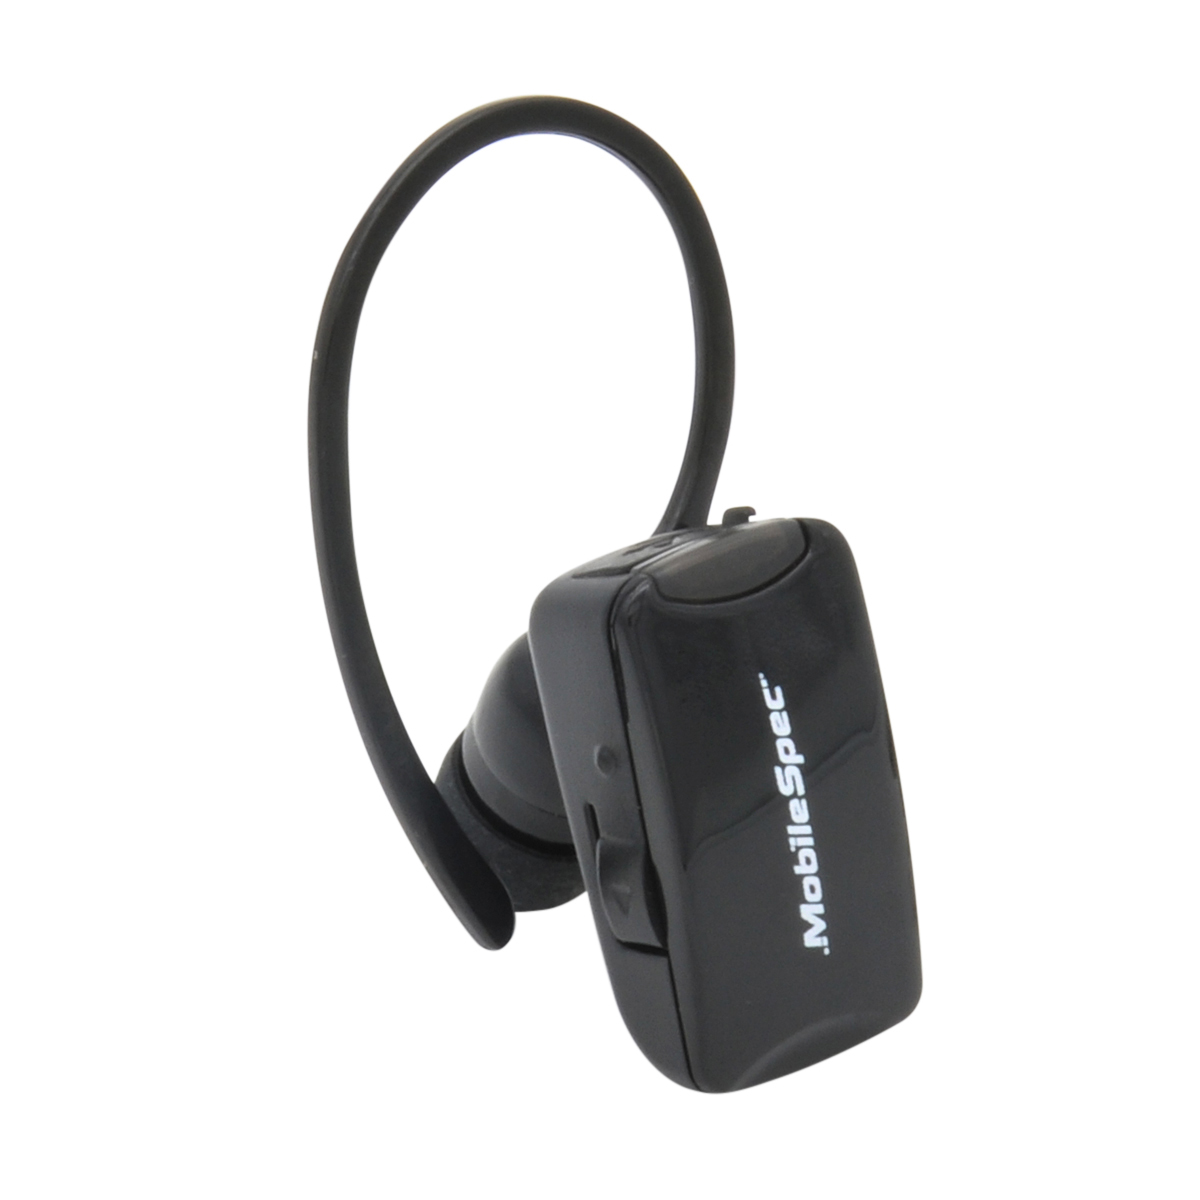 MobileSpec Mono Bluetooth In-Ear Headset with Camera Ready Function